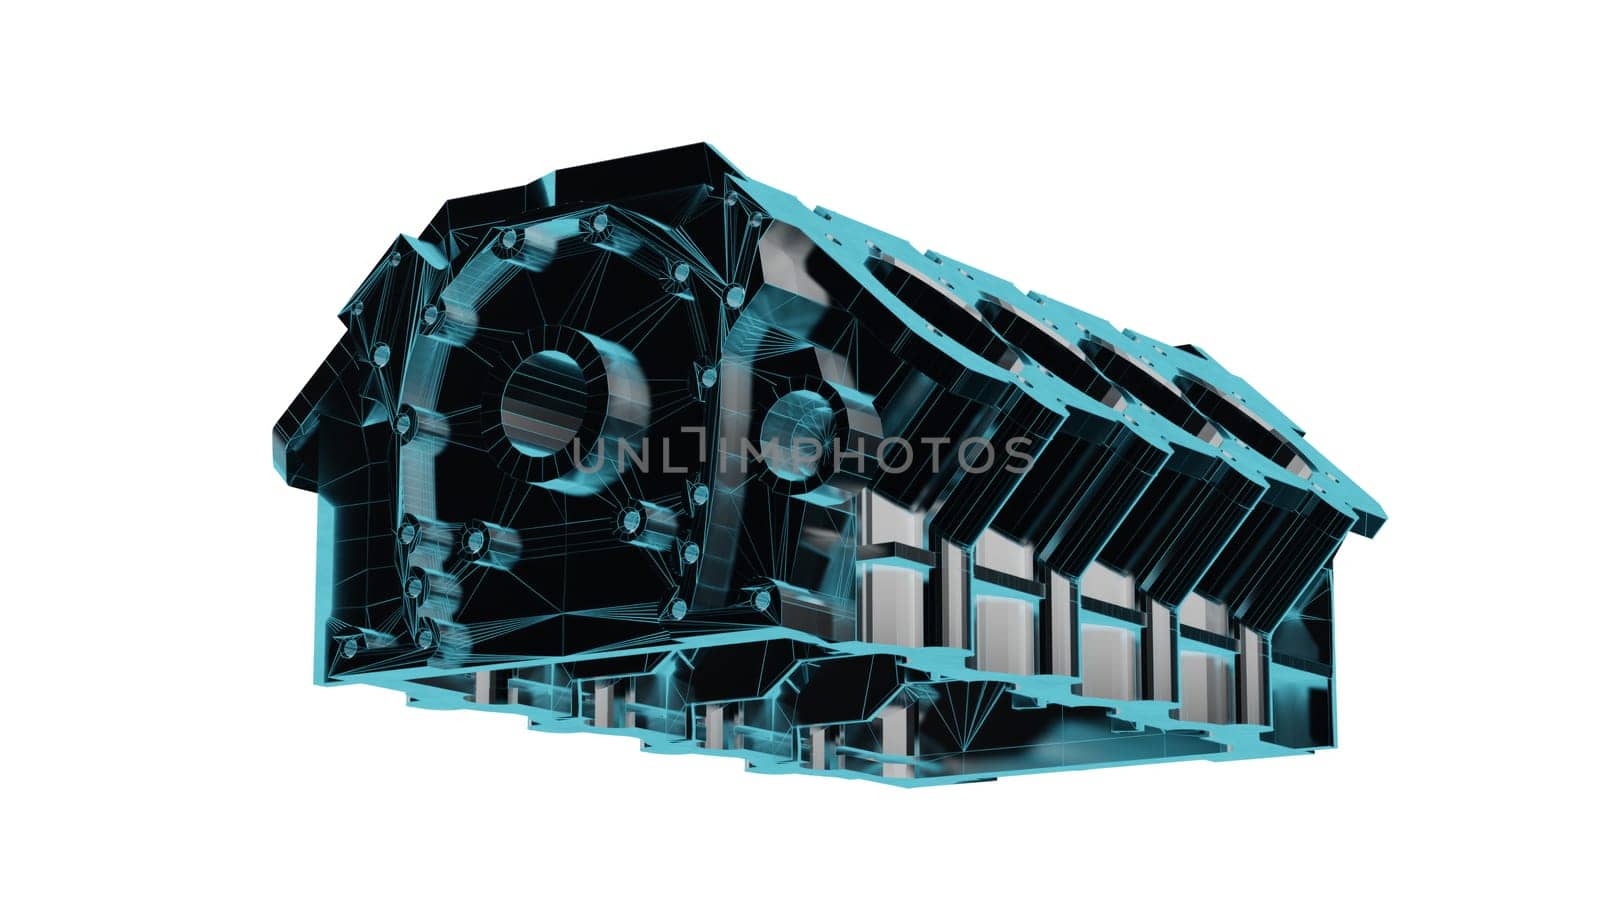 Close up detailed fully textured 3D render over white background of technically advanced car engine block assembled with steel cylinders casings, pistons, crankshaft and other engineering parts